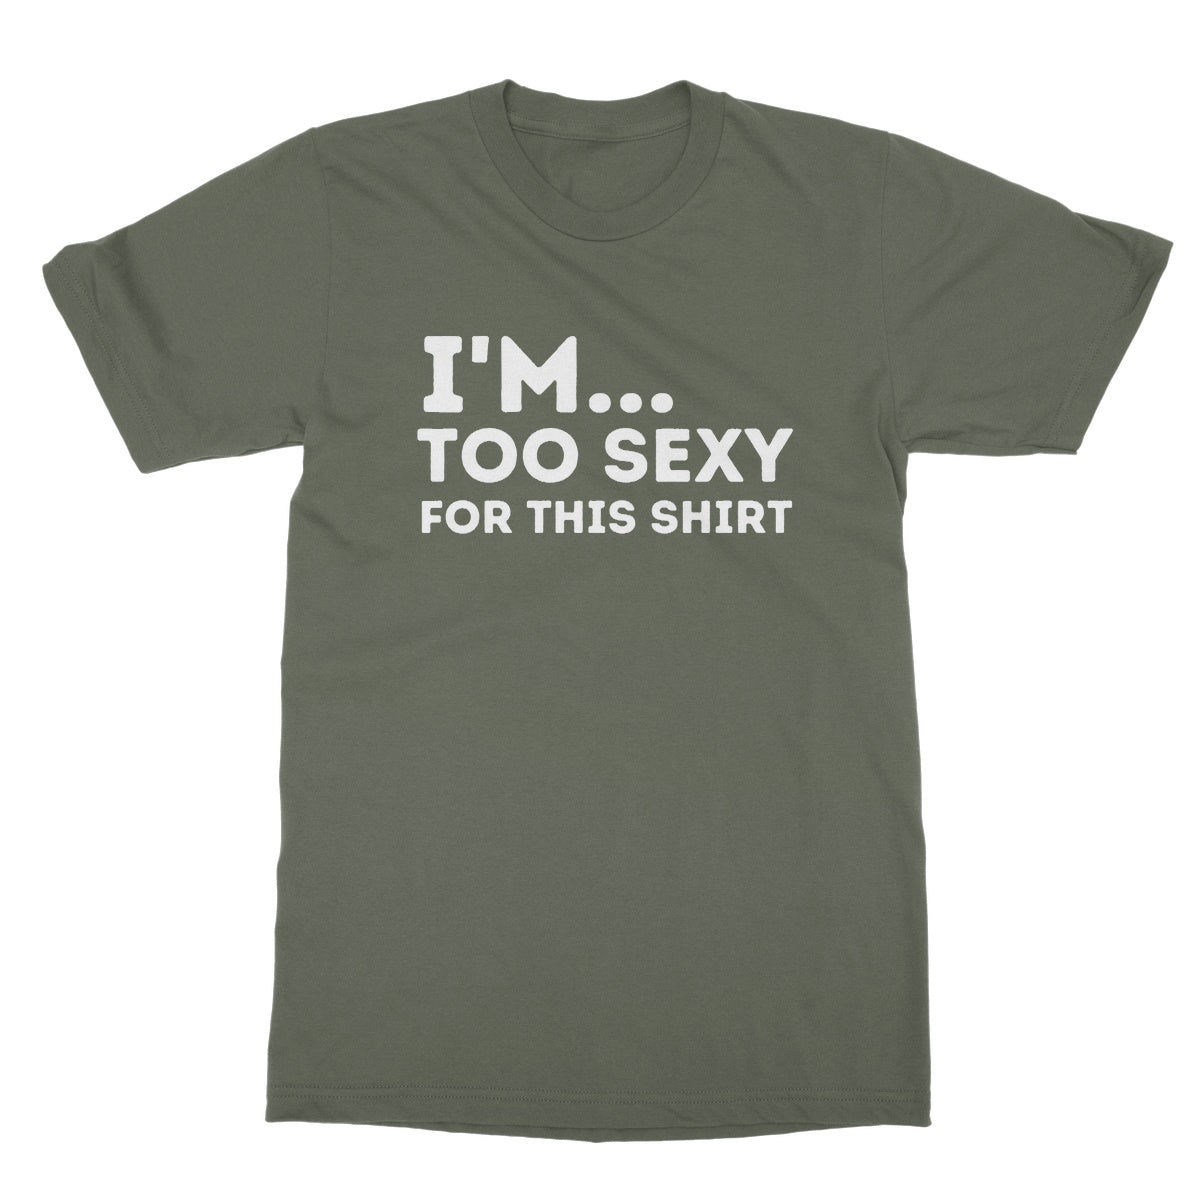 I'm too sexy for this shirt t shirt green